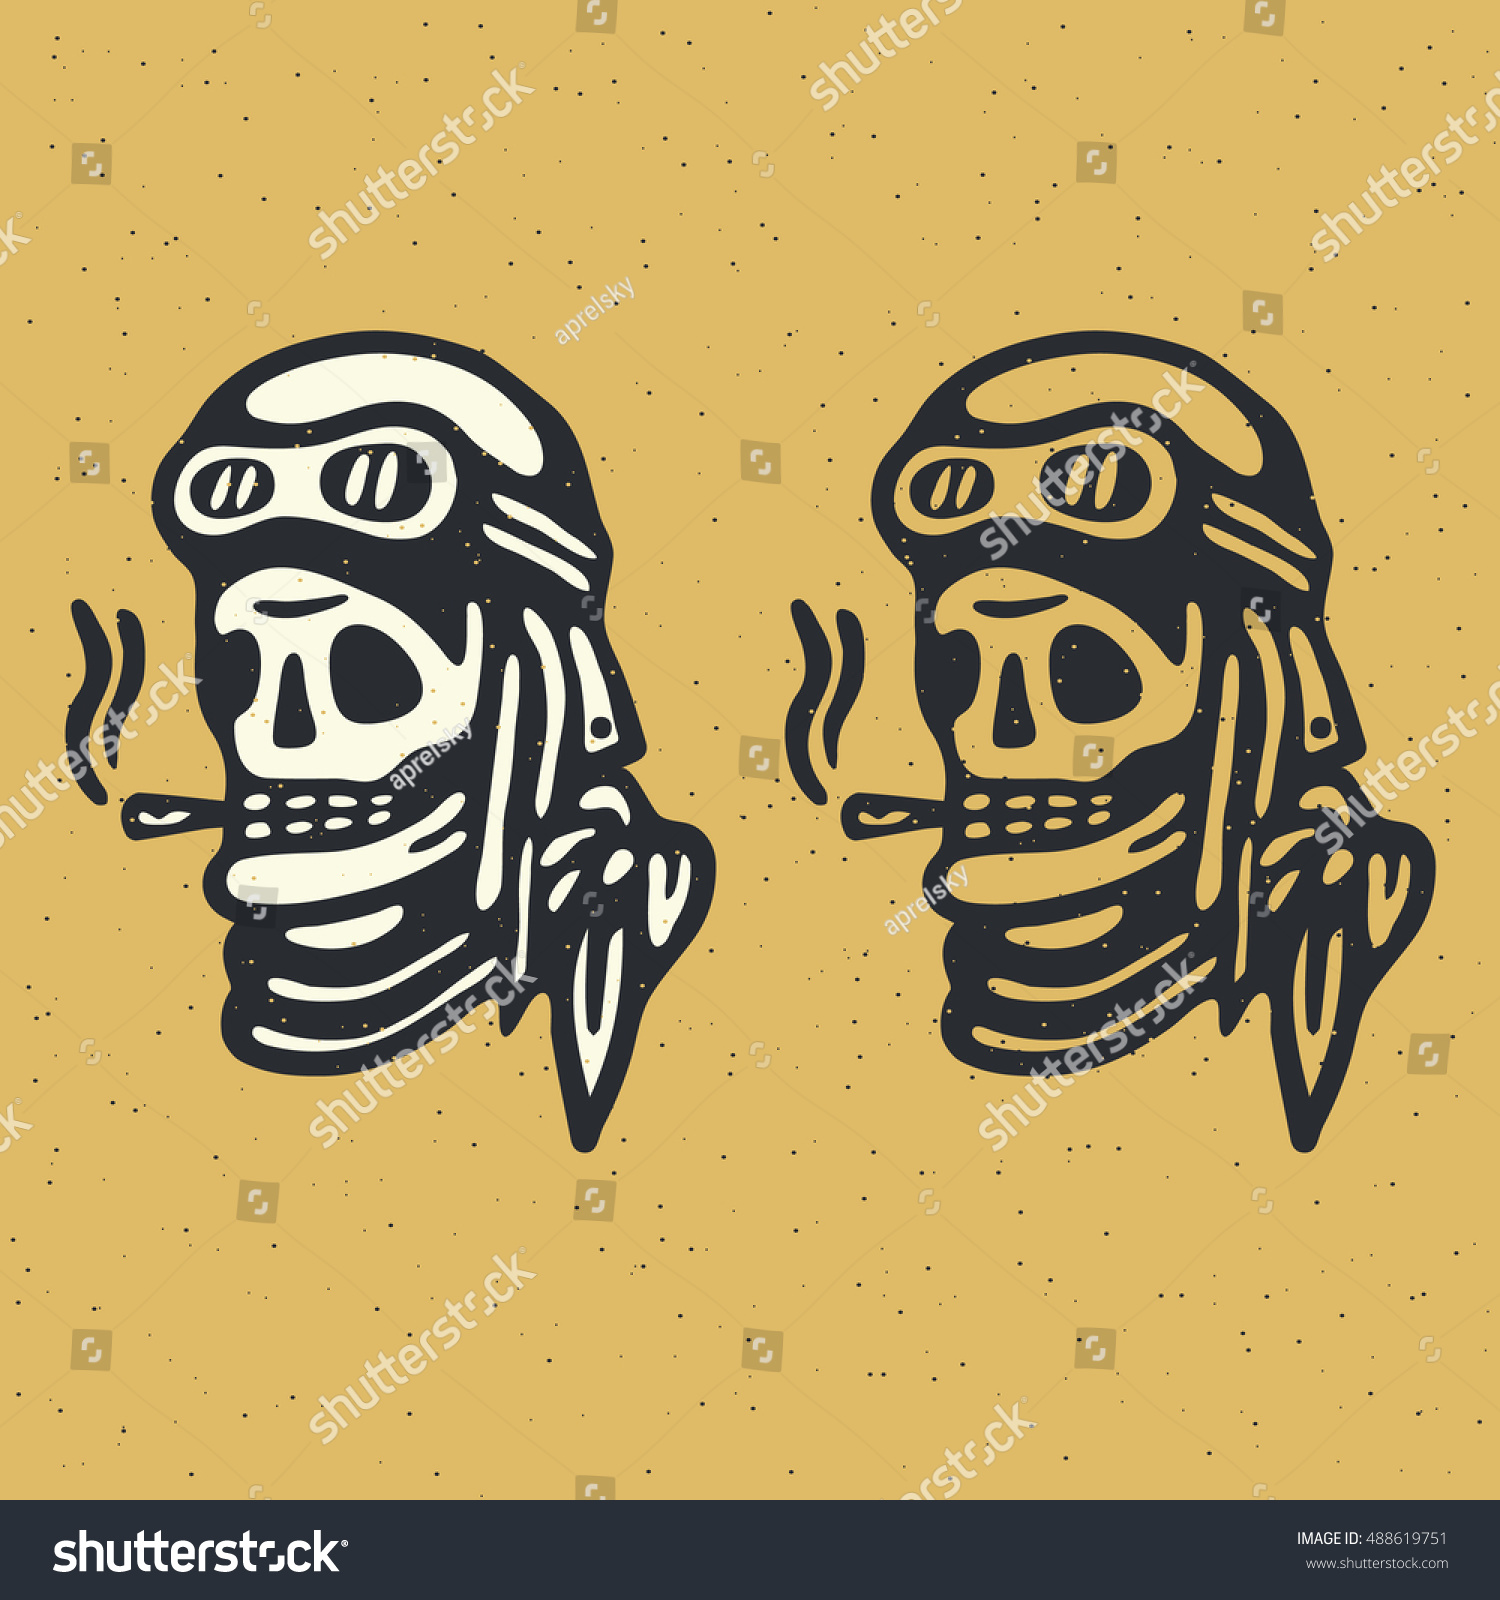 SVG of Traditional tattoo flash rider skull with cigarette. Vector illustration on grunge texture background svg